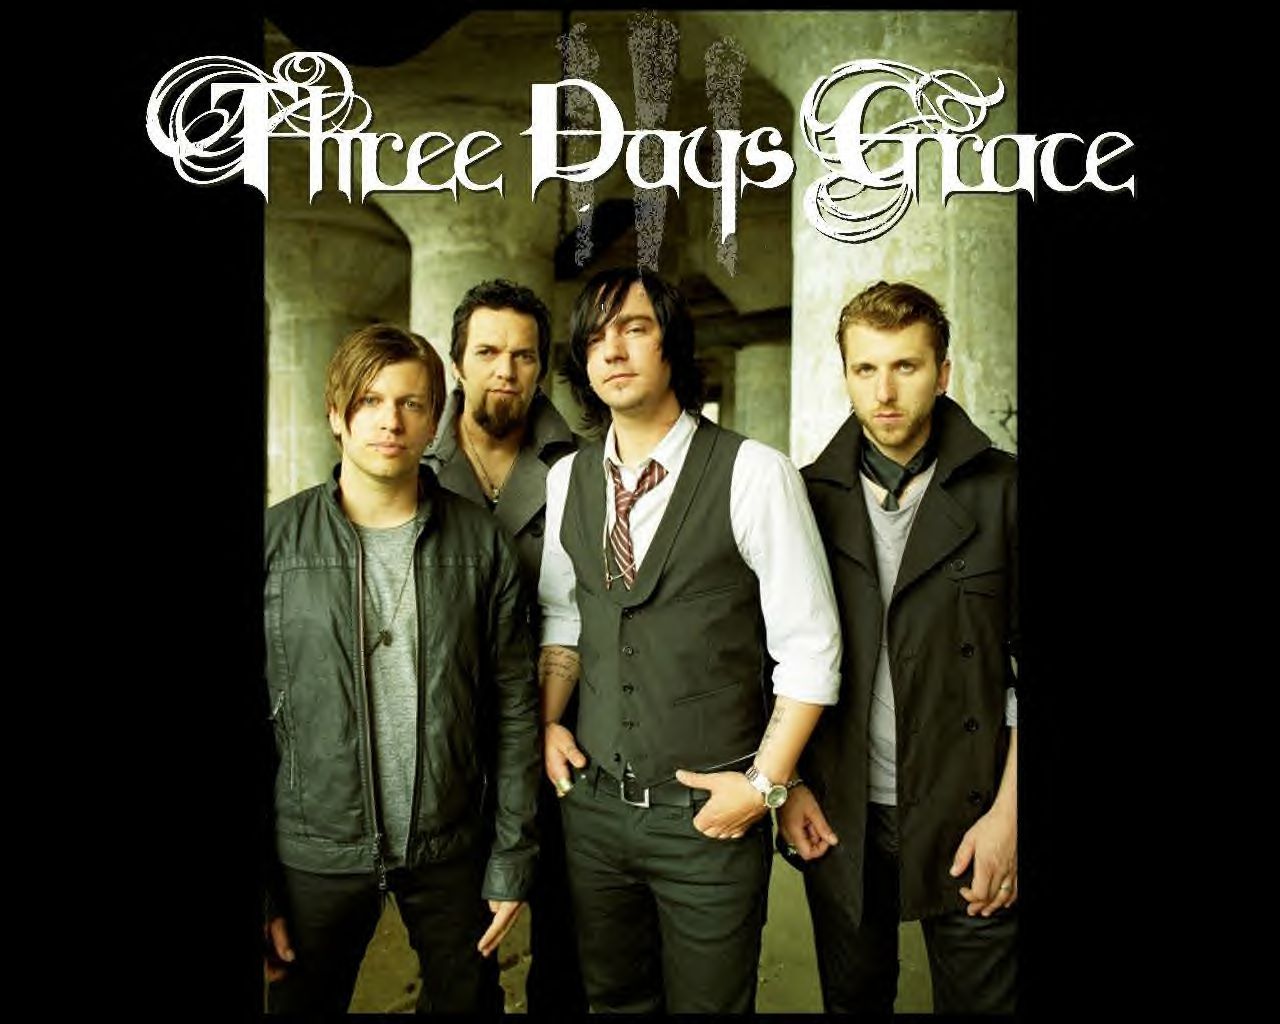 Three Days Grace - Photo Colection